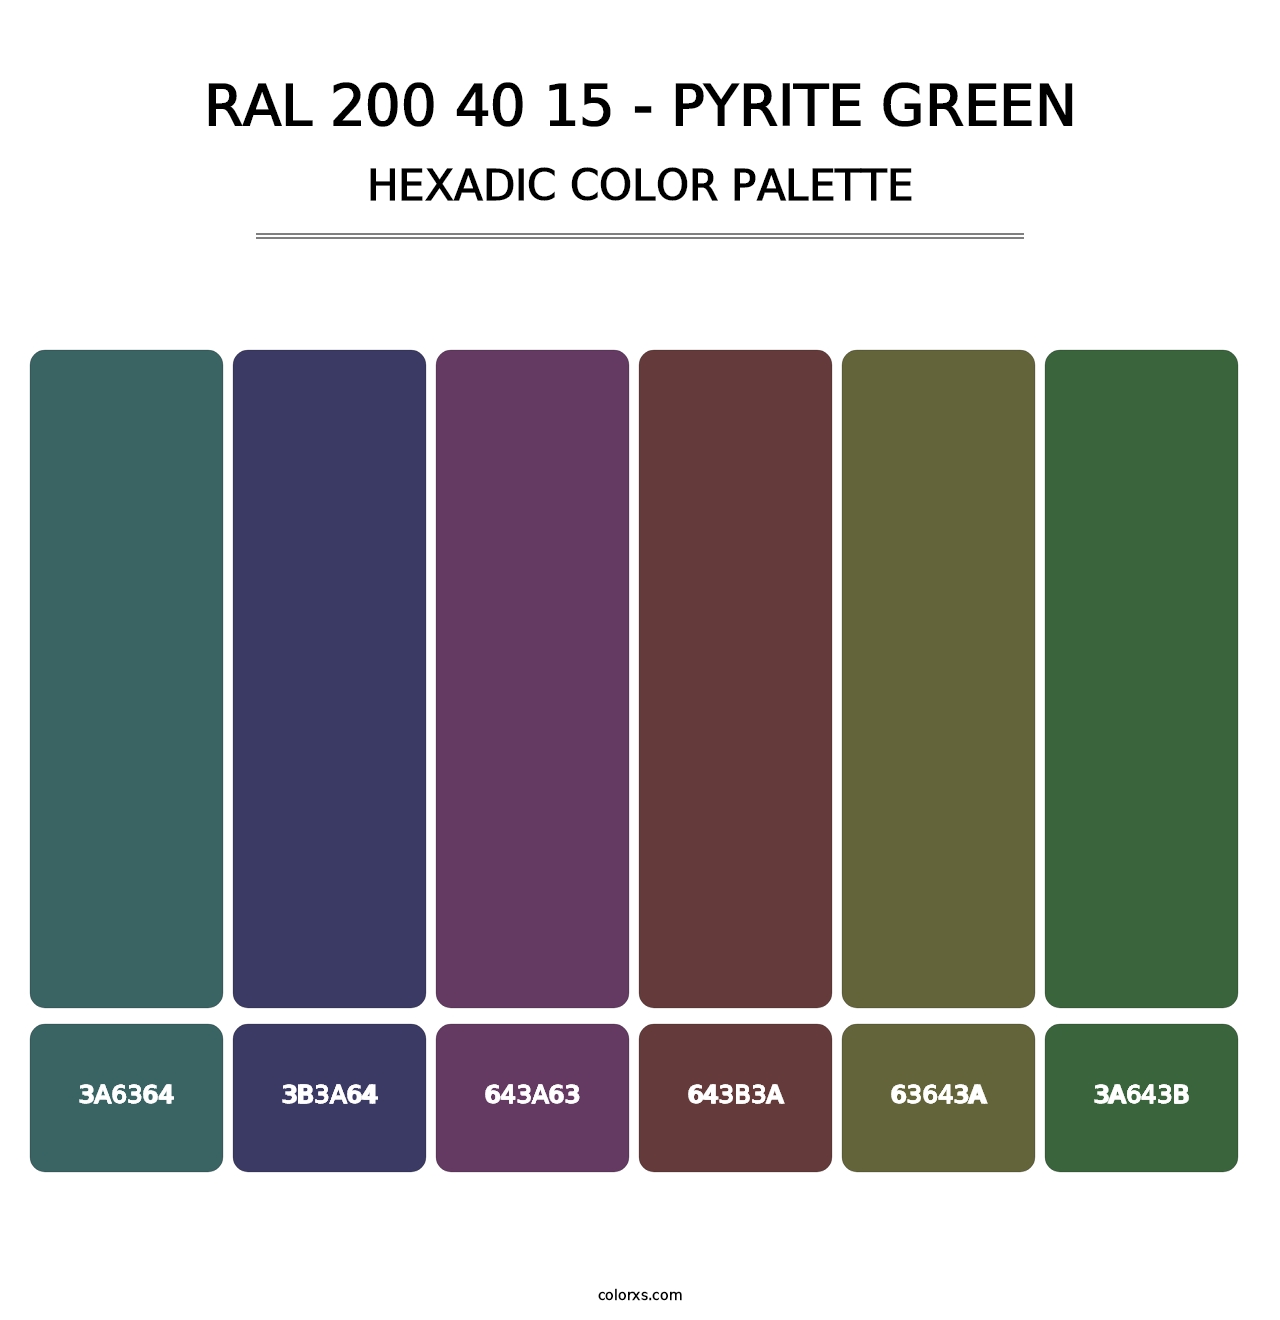 RAL 200 40 15 - Pyrite Green - Hexadic Color Palette